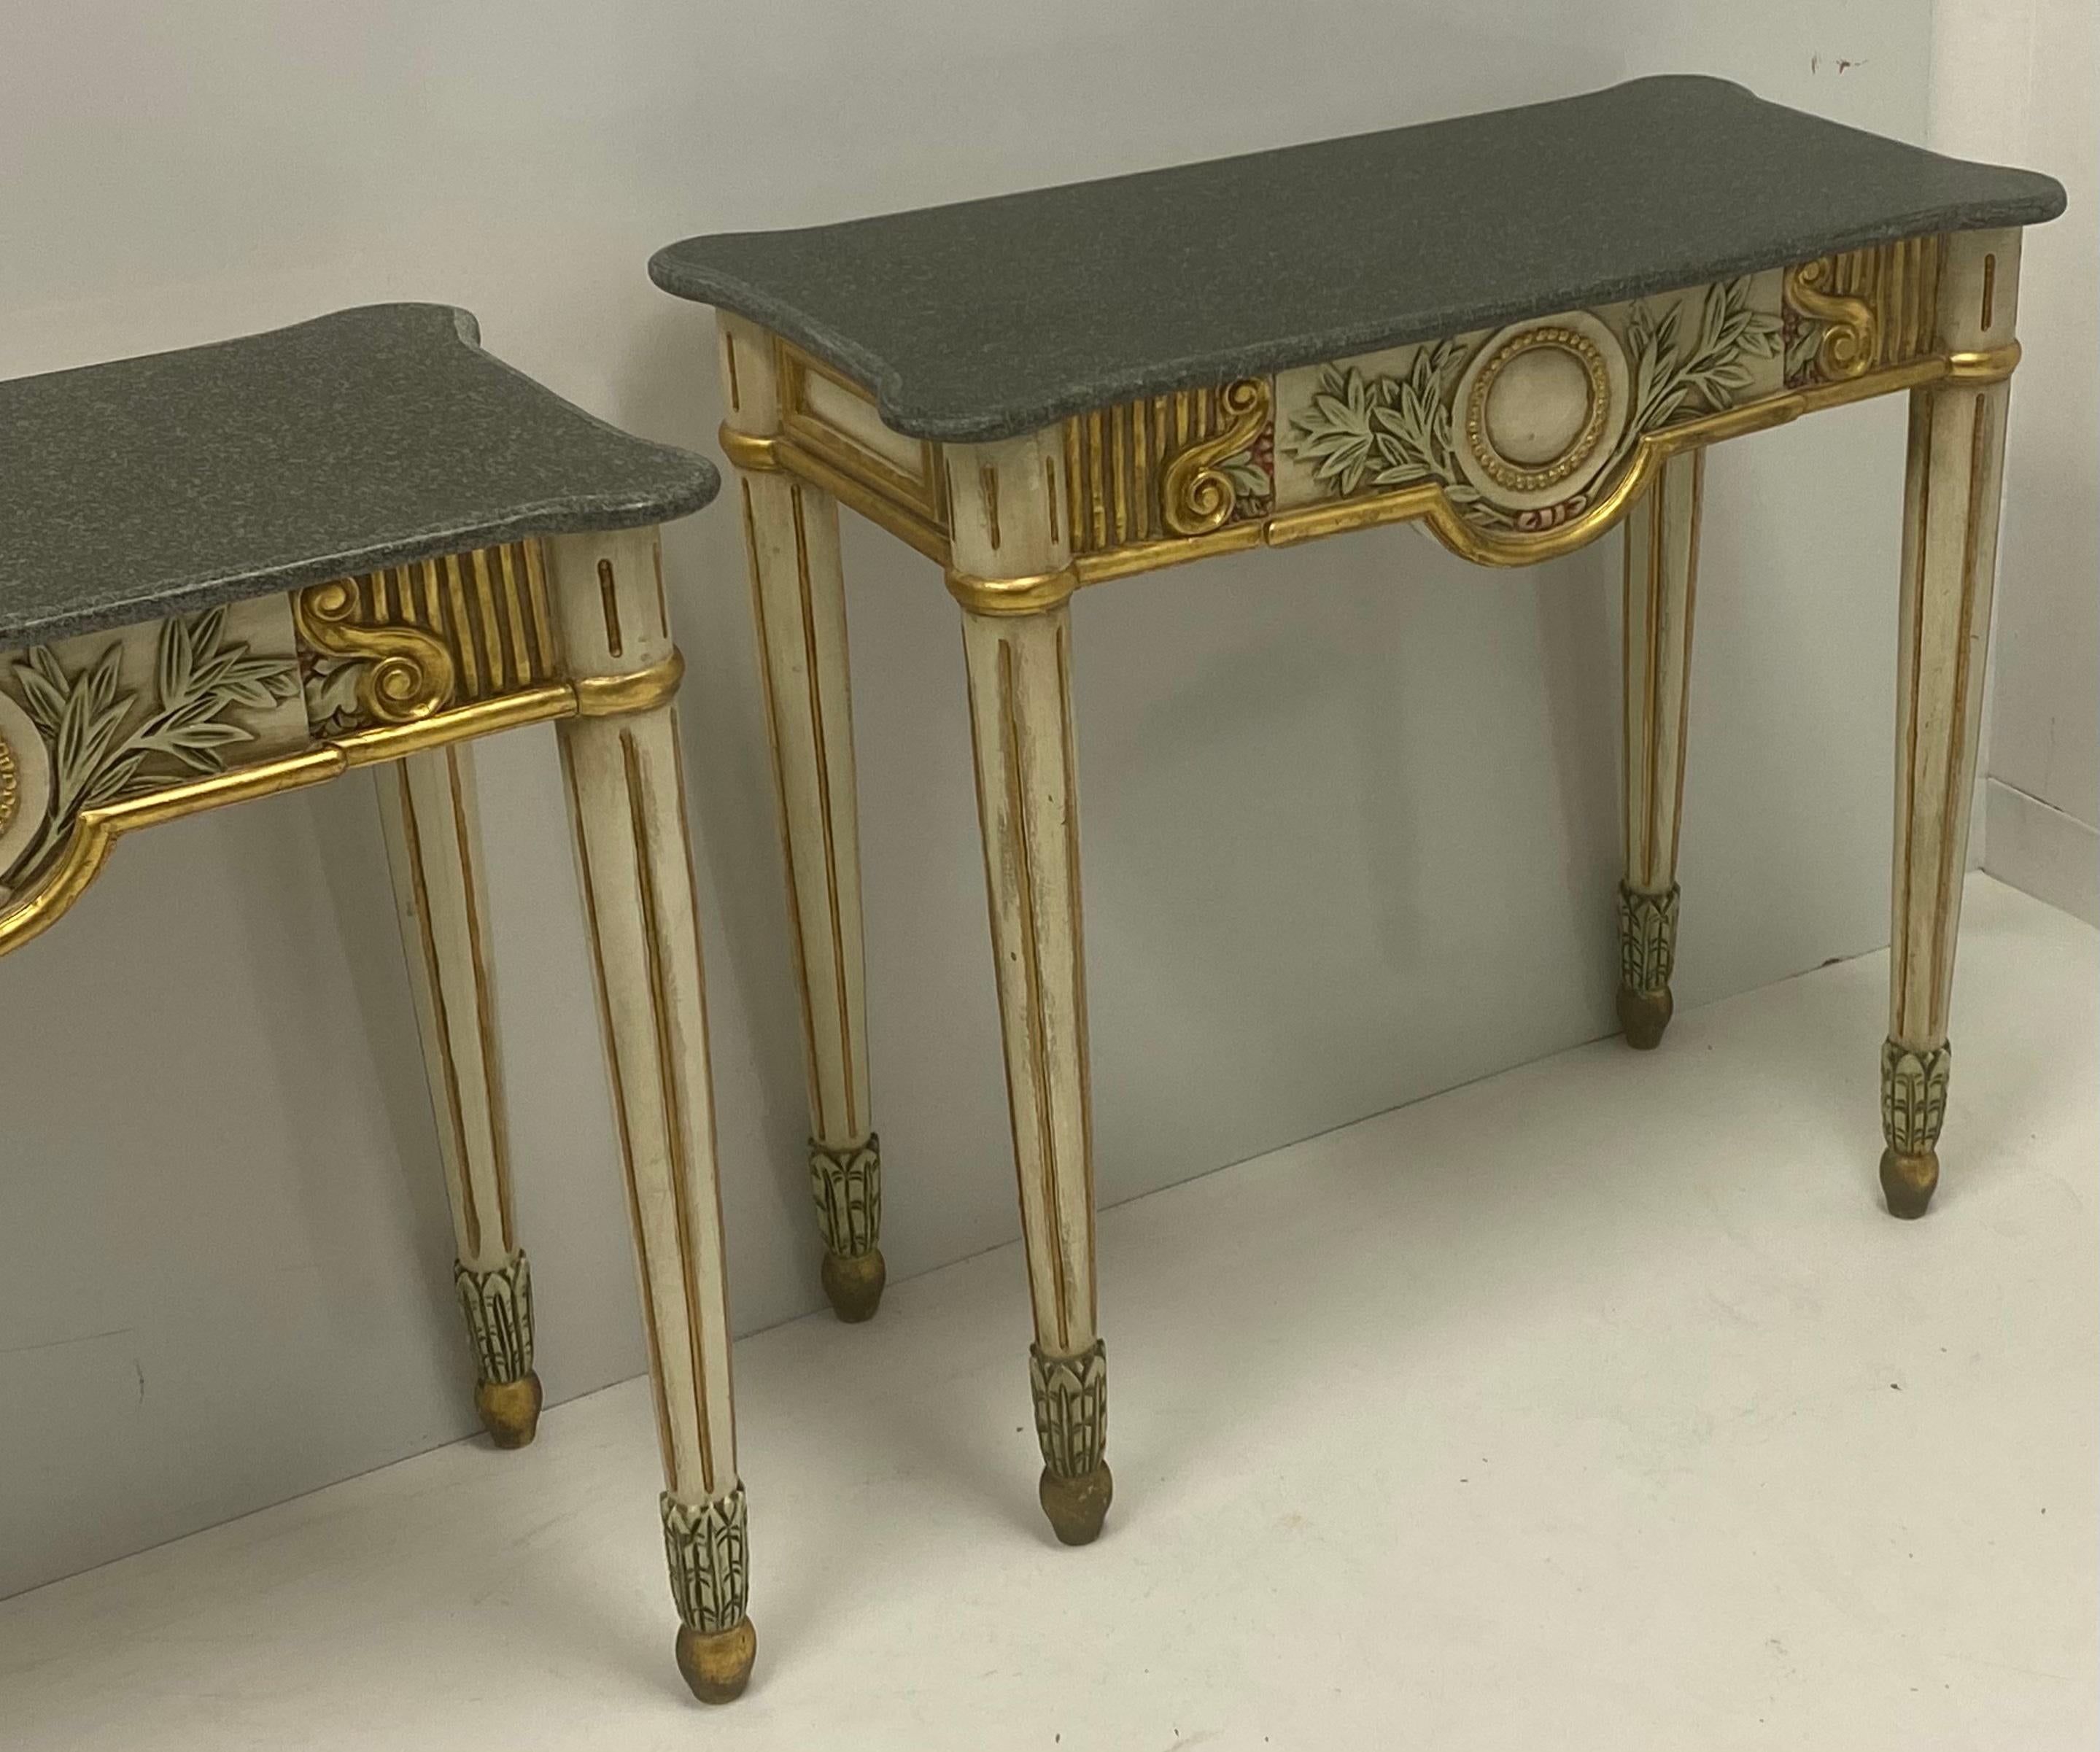 This is a pair of giltwood Italian console tables with granite tops. The tops are not attached, and both the bases and tops are in very good condition. The pieces are unmarked.